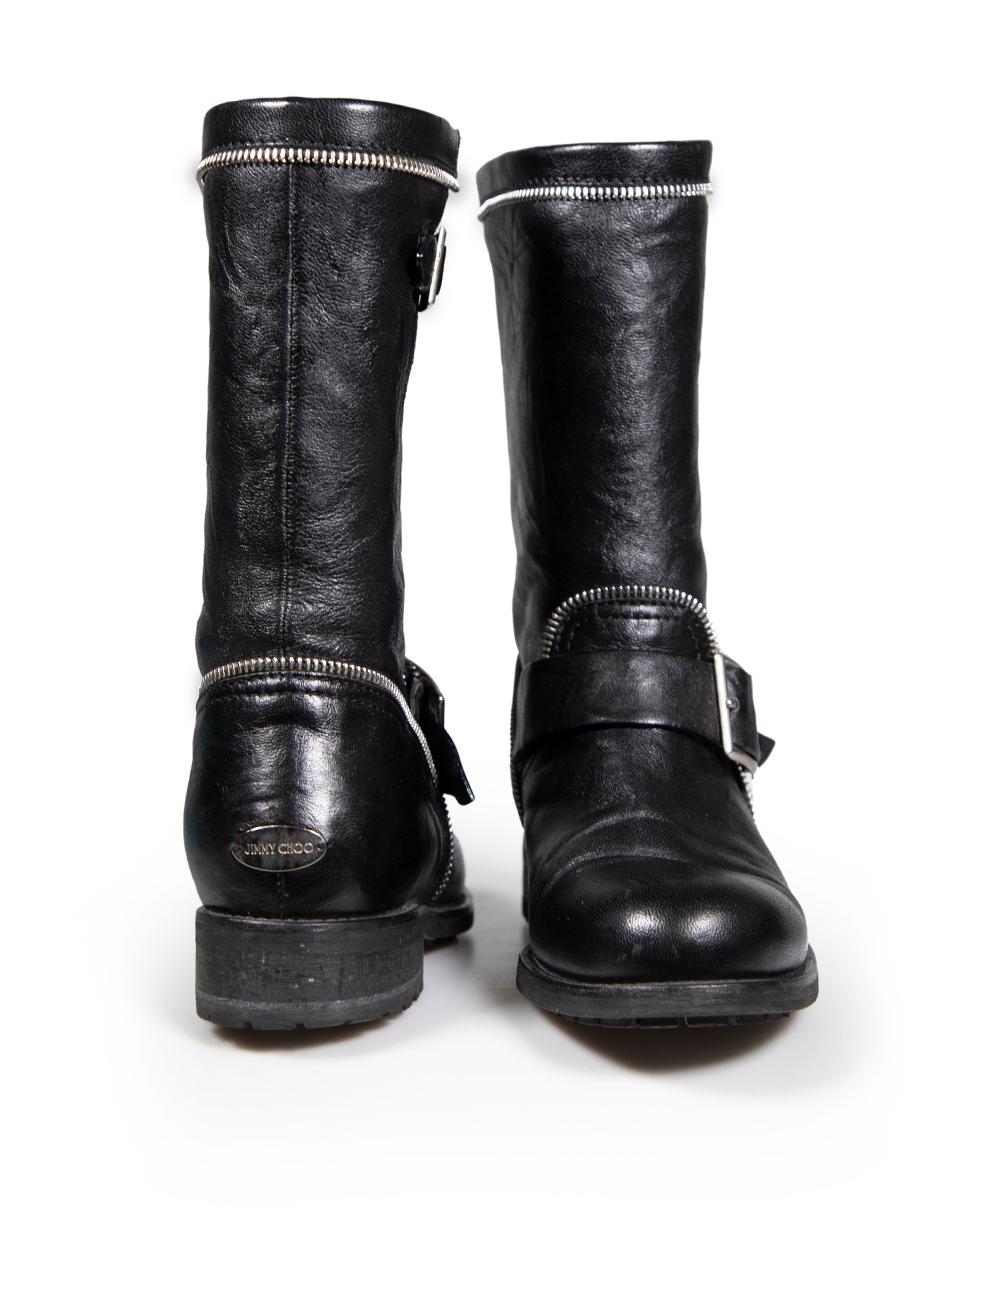 Jimmy Choo Black Leather Buckle Zip Biker Boots Size IT 36 In Good Condition For Sale In London, GB